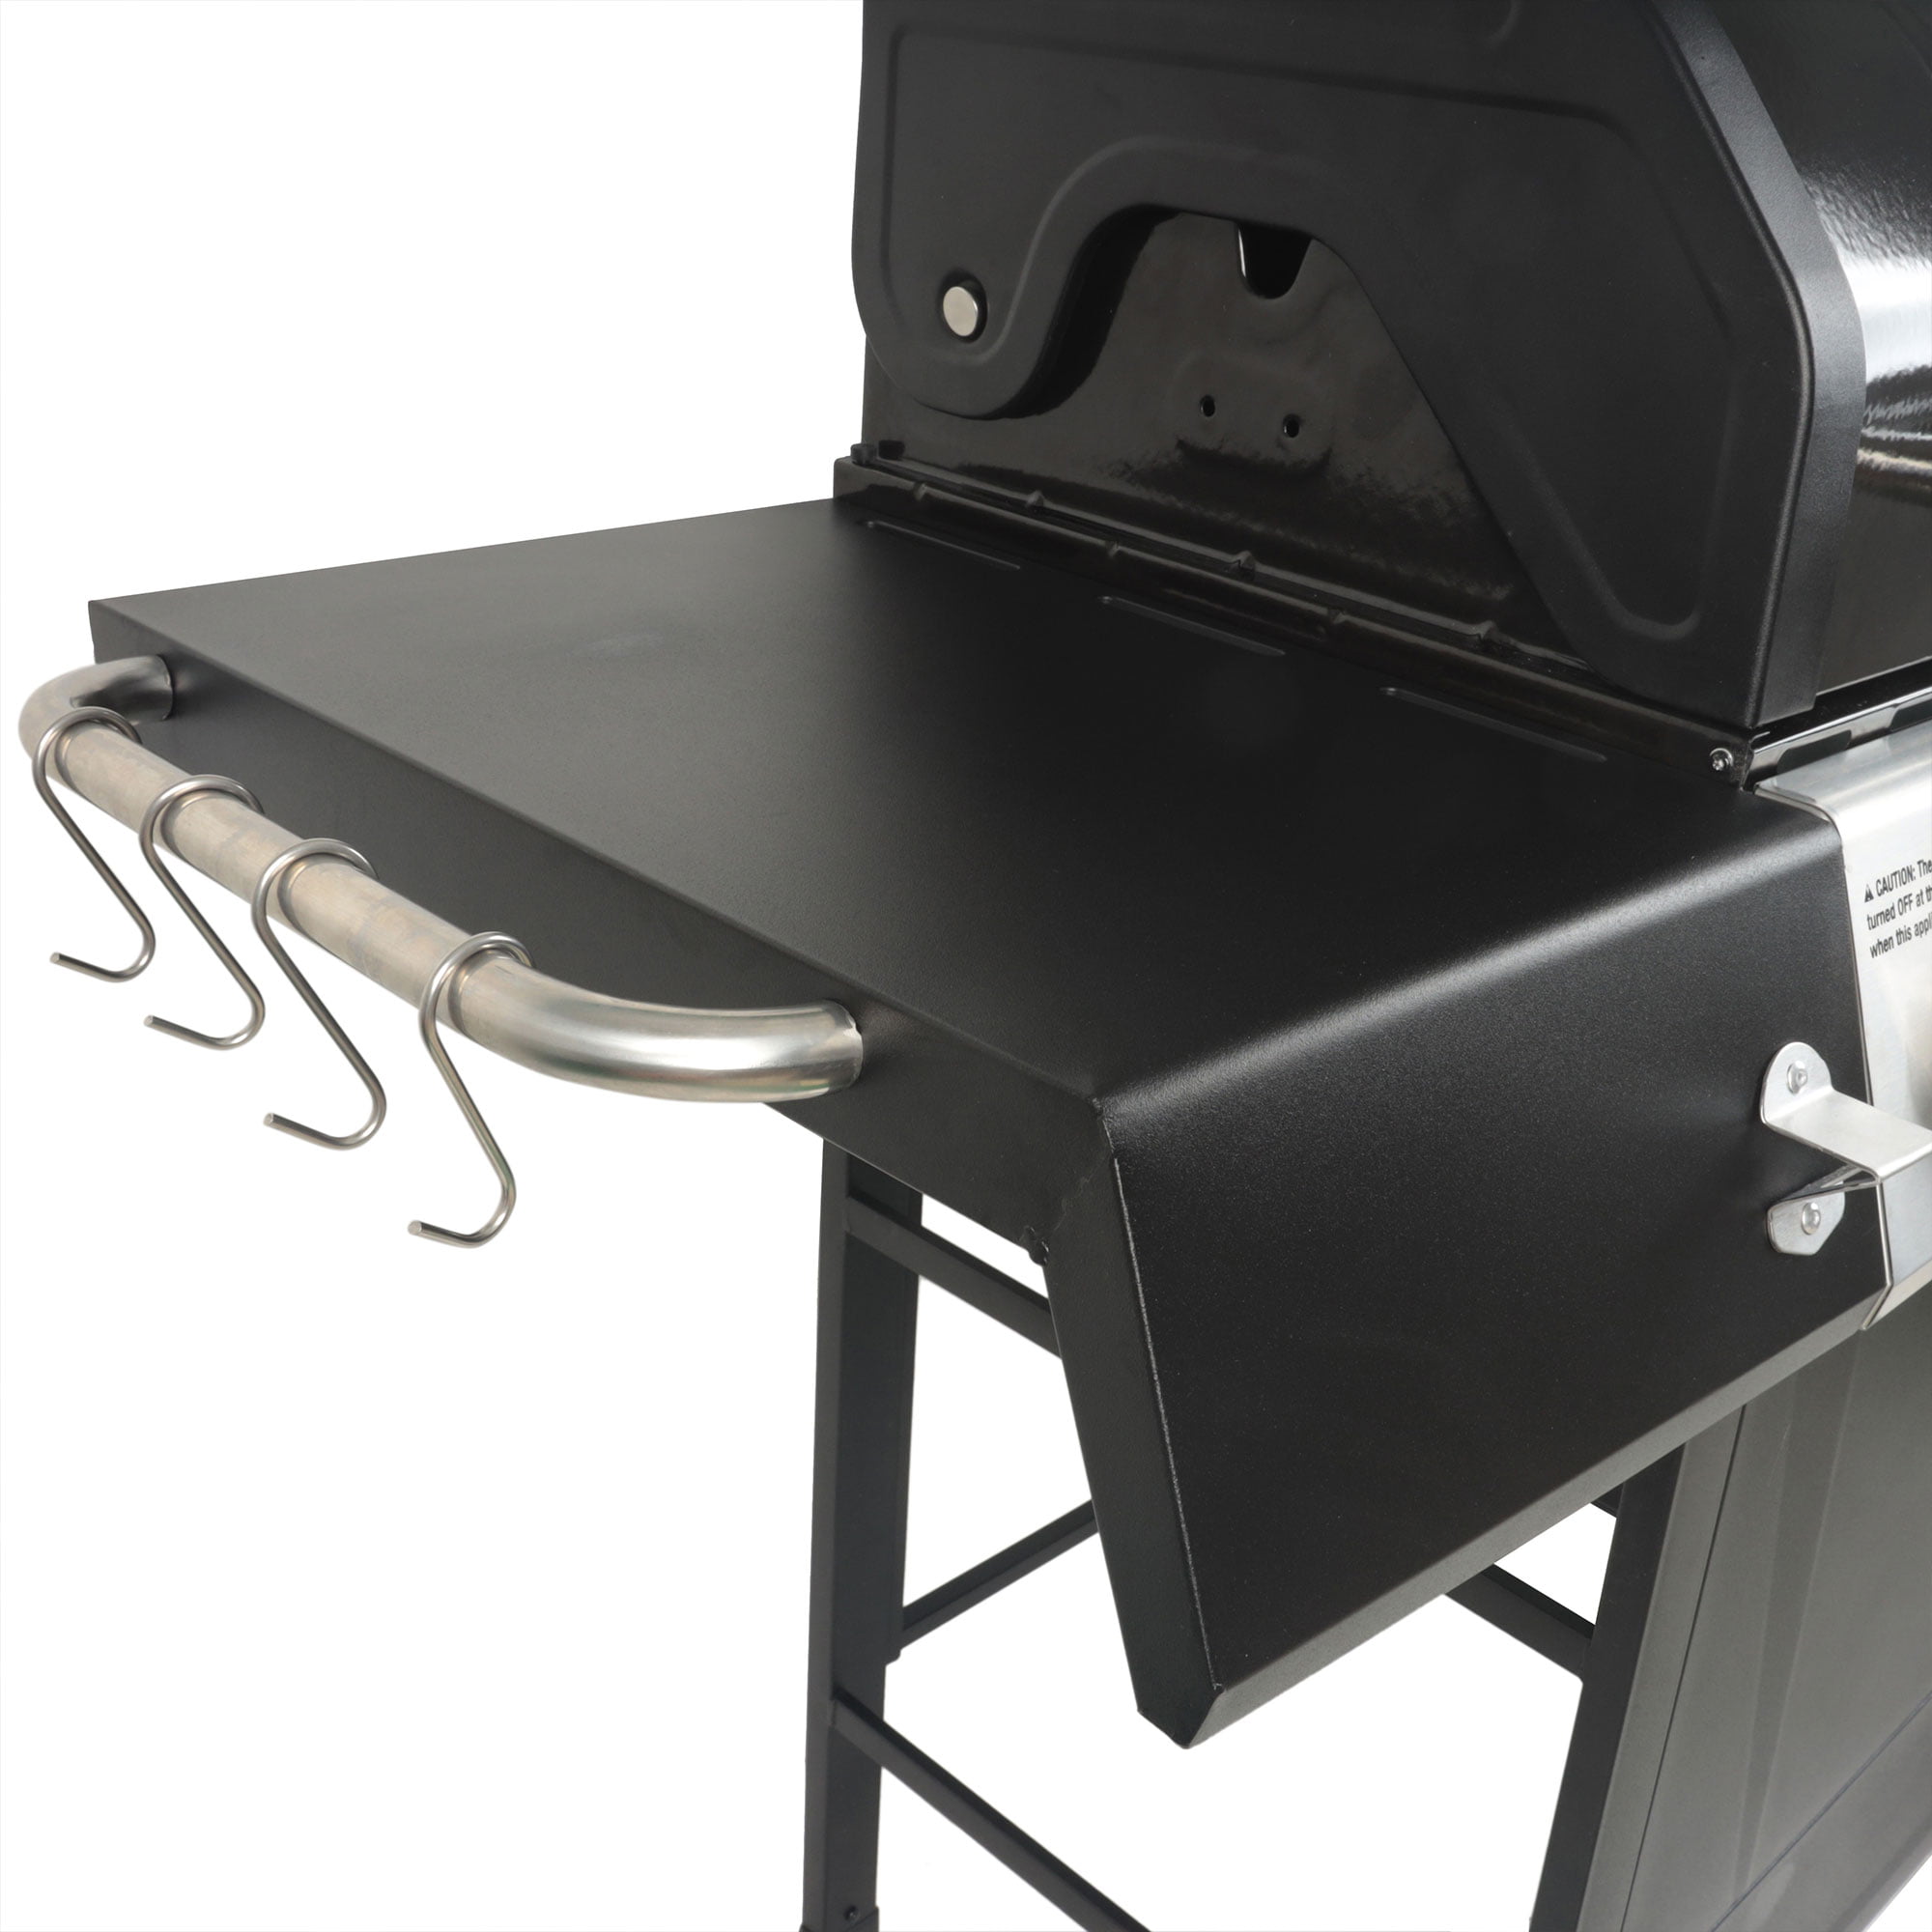 Grill Boss Gbc1932m Outdoor Bbq 3 Burner Propane Gas Grill For Barbecue  Cooking With Top Cover Lid, Wheels, And Side Storage Shelves, Black : Target